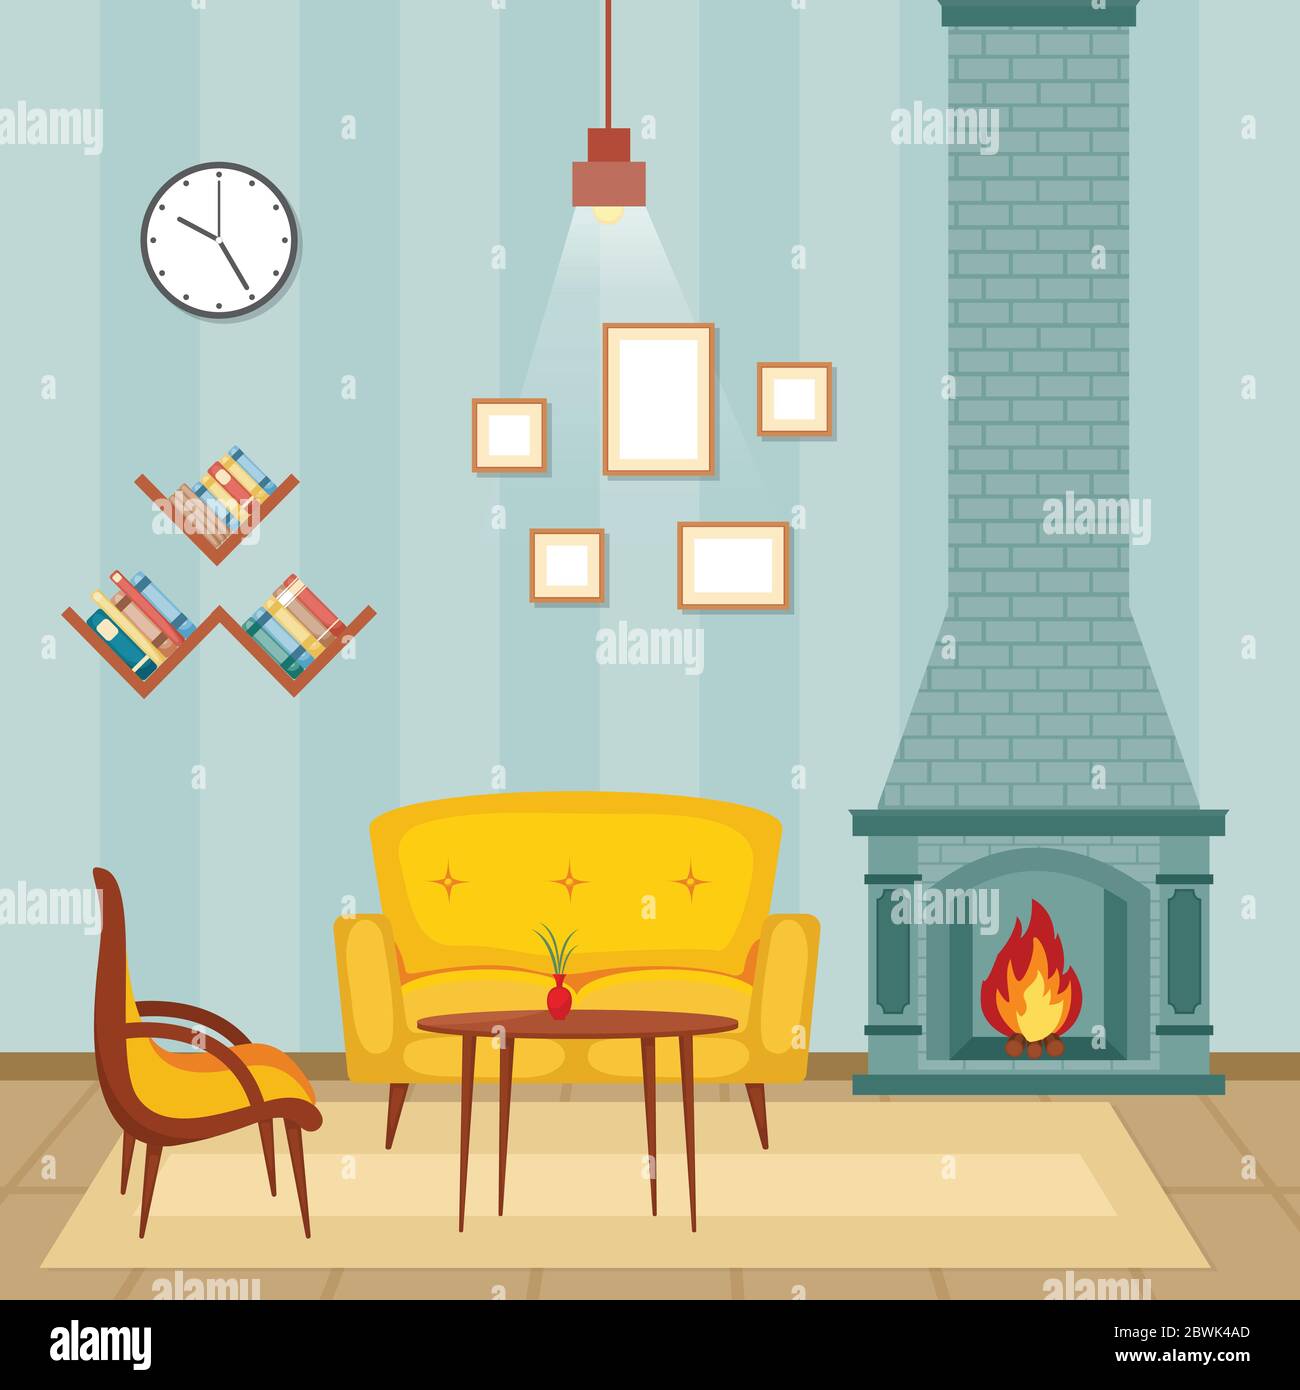 Fireplace Living Room Family House Interior Furniture Vector Illustration Stock Vector